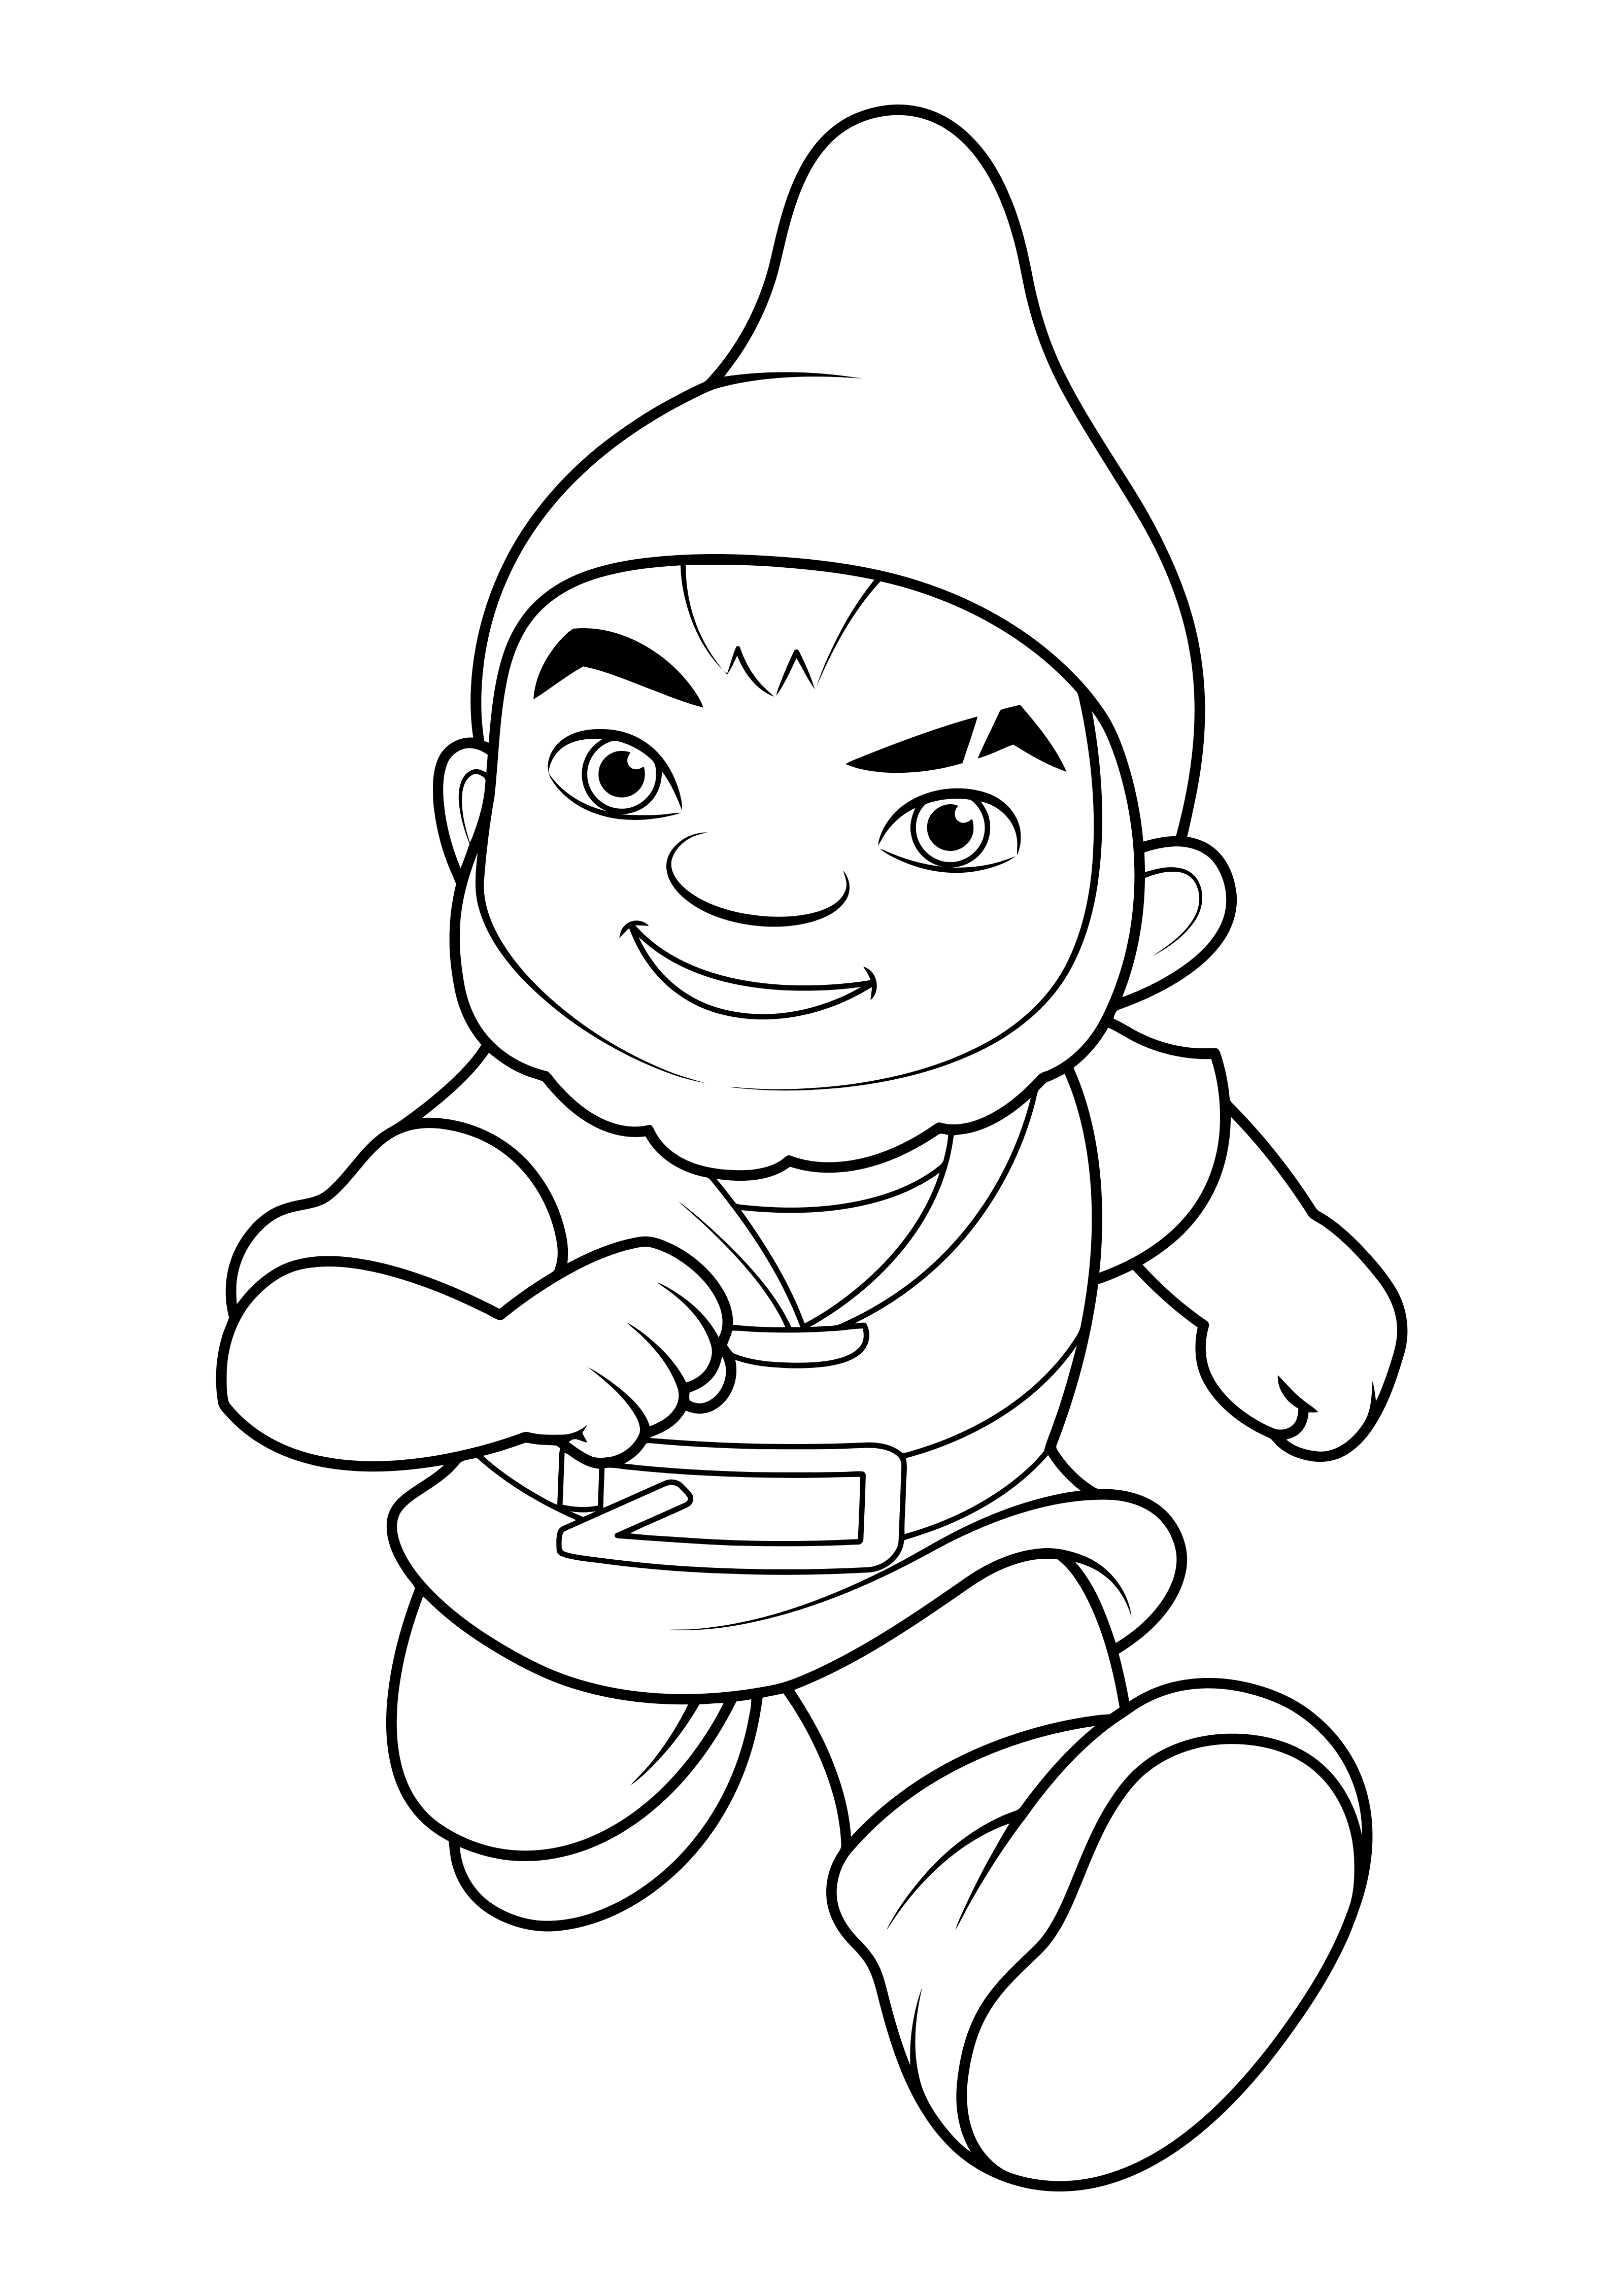 Sherlock Gnomes coloring pages to download and print for free